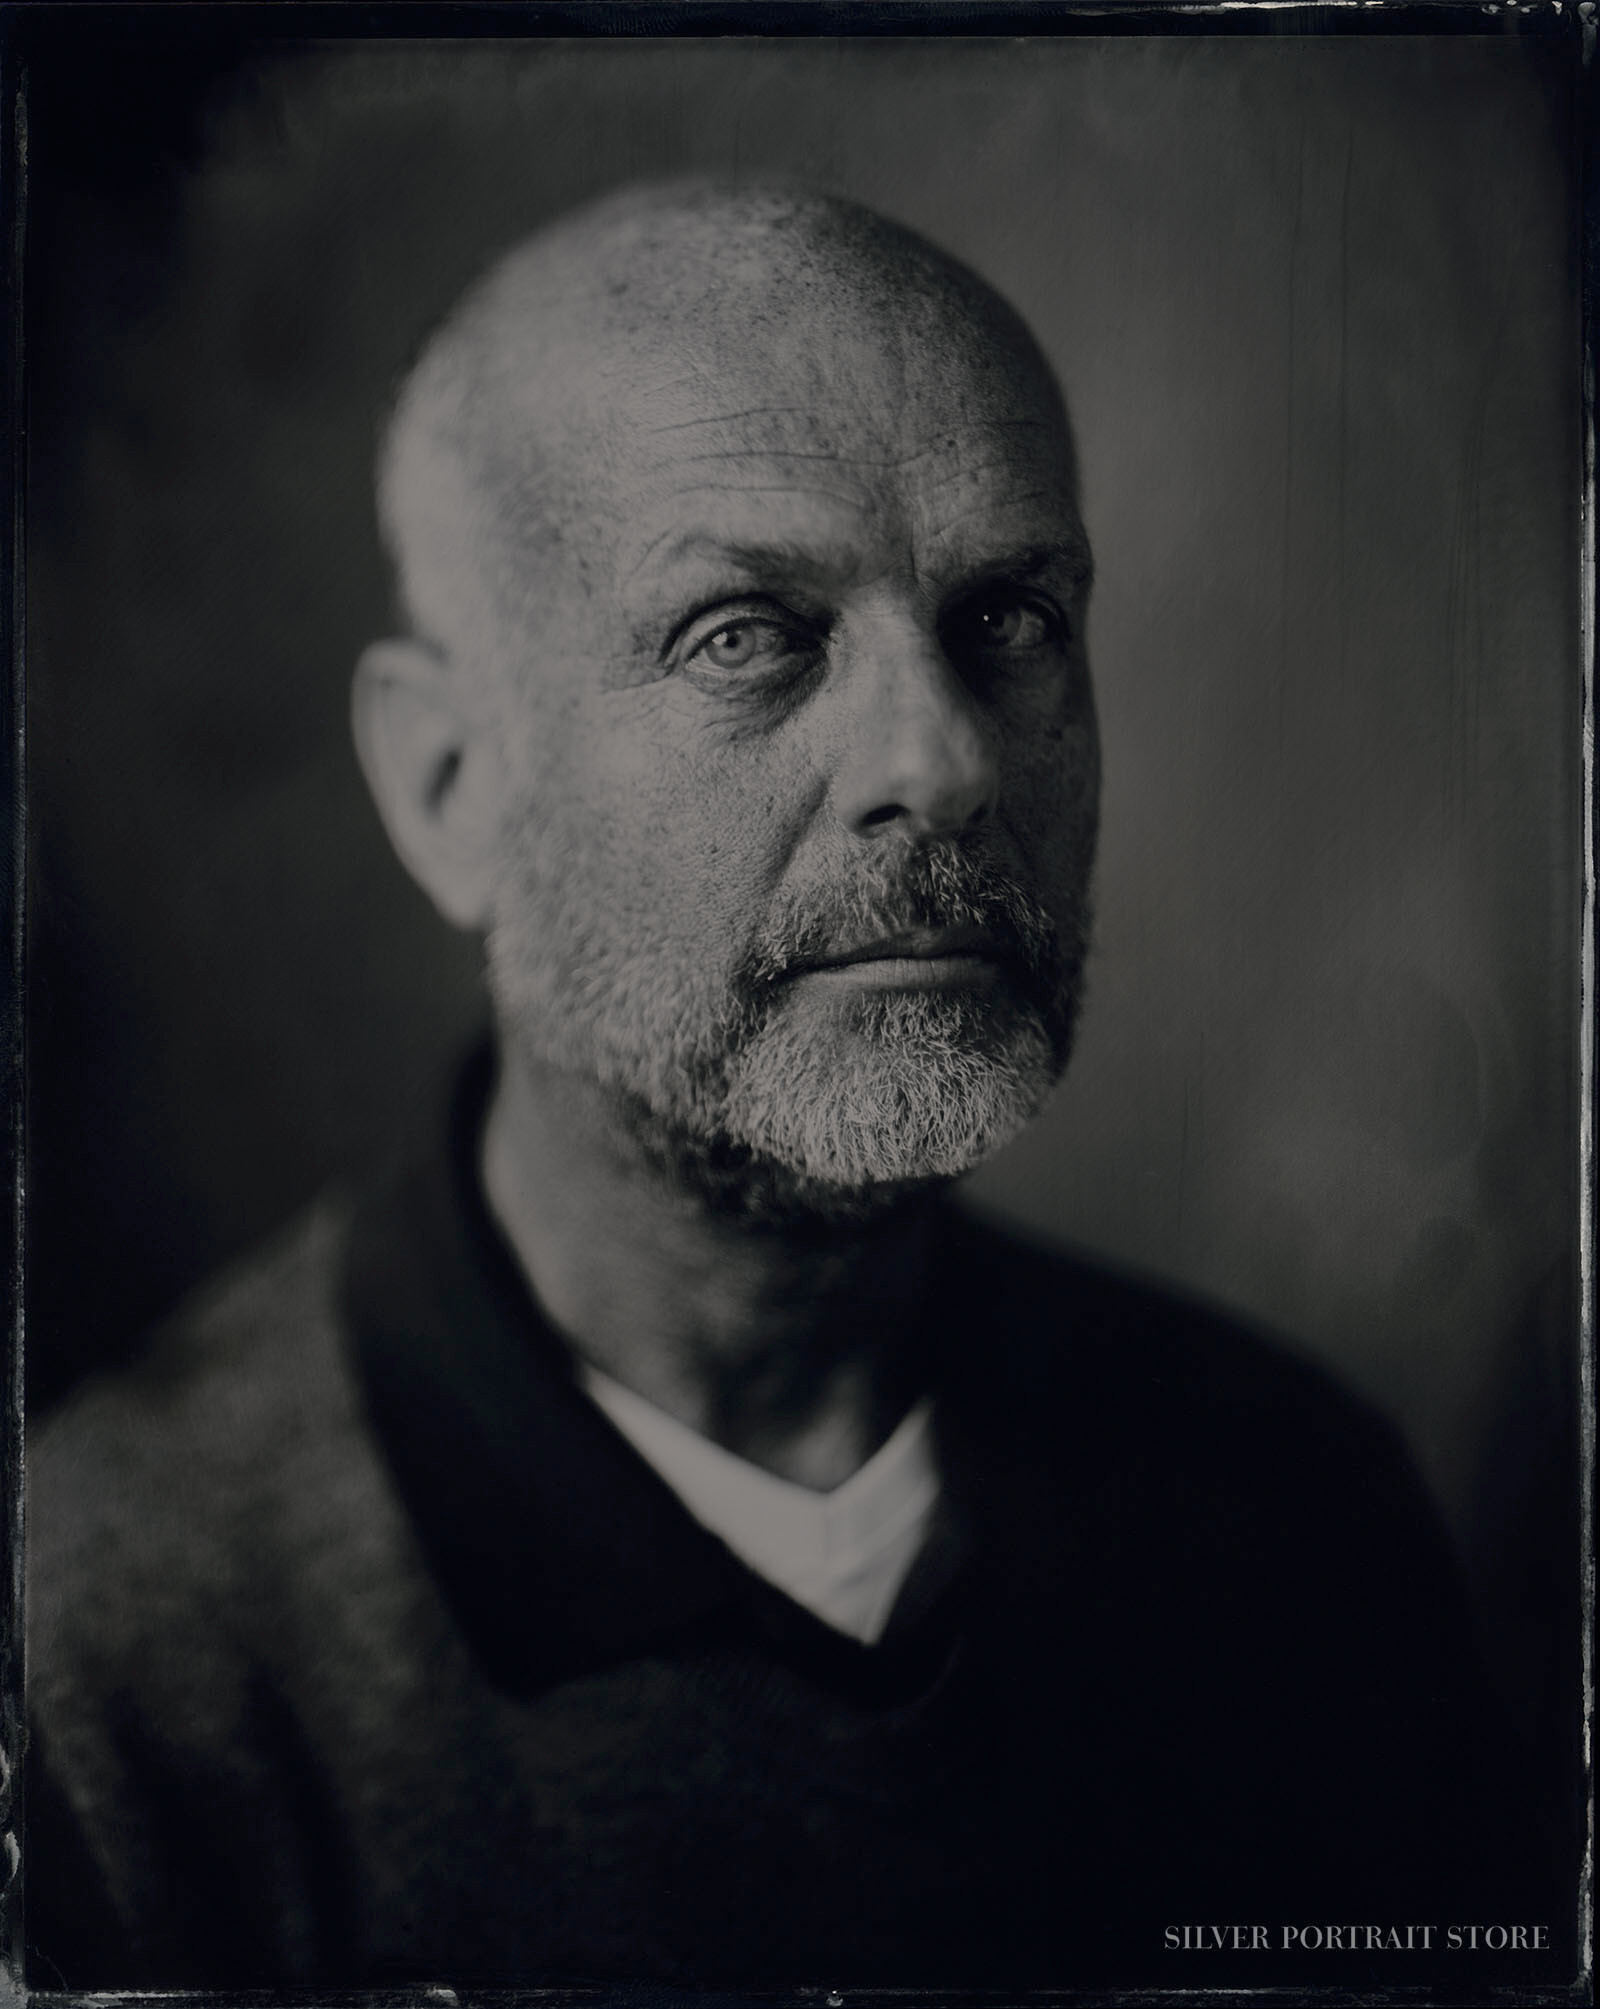 Martien-Silver Portrait Store-Scan from Wet plate collodion-Tintype 20 x 25 cm